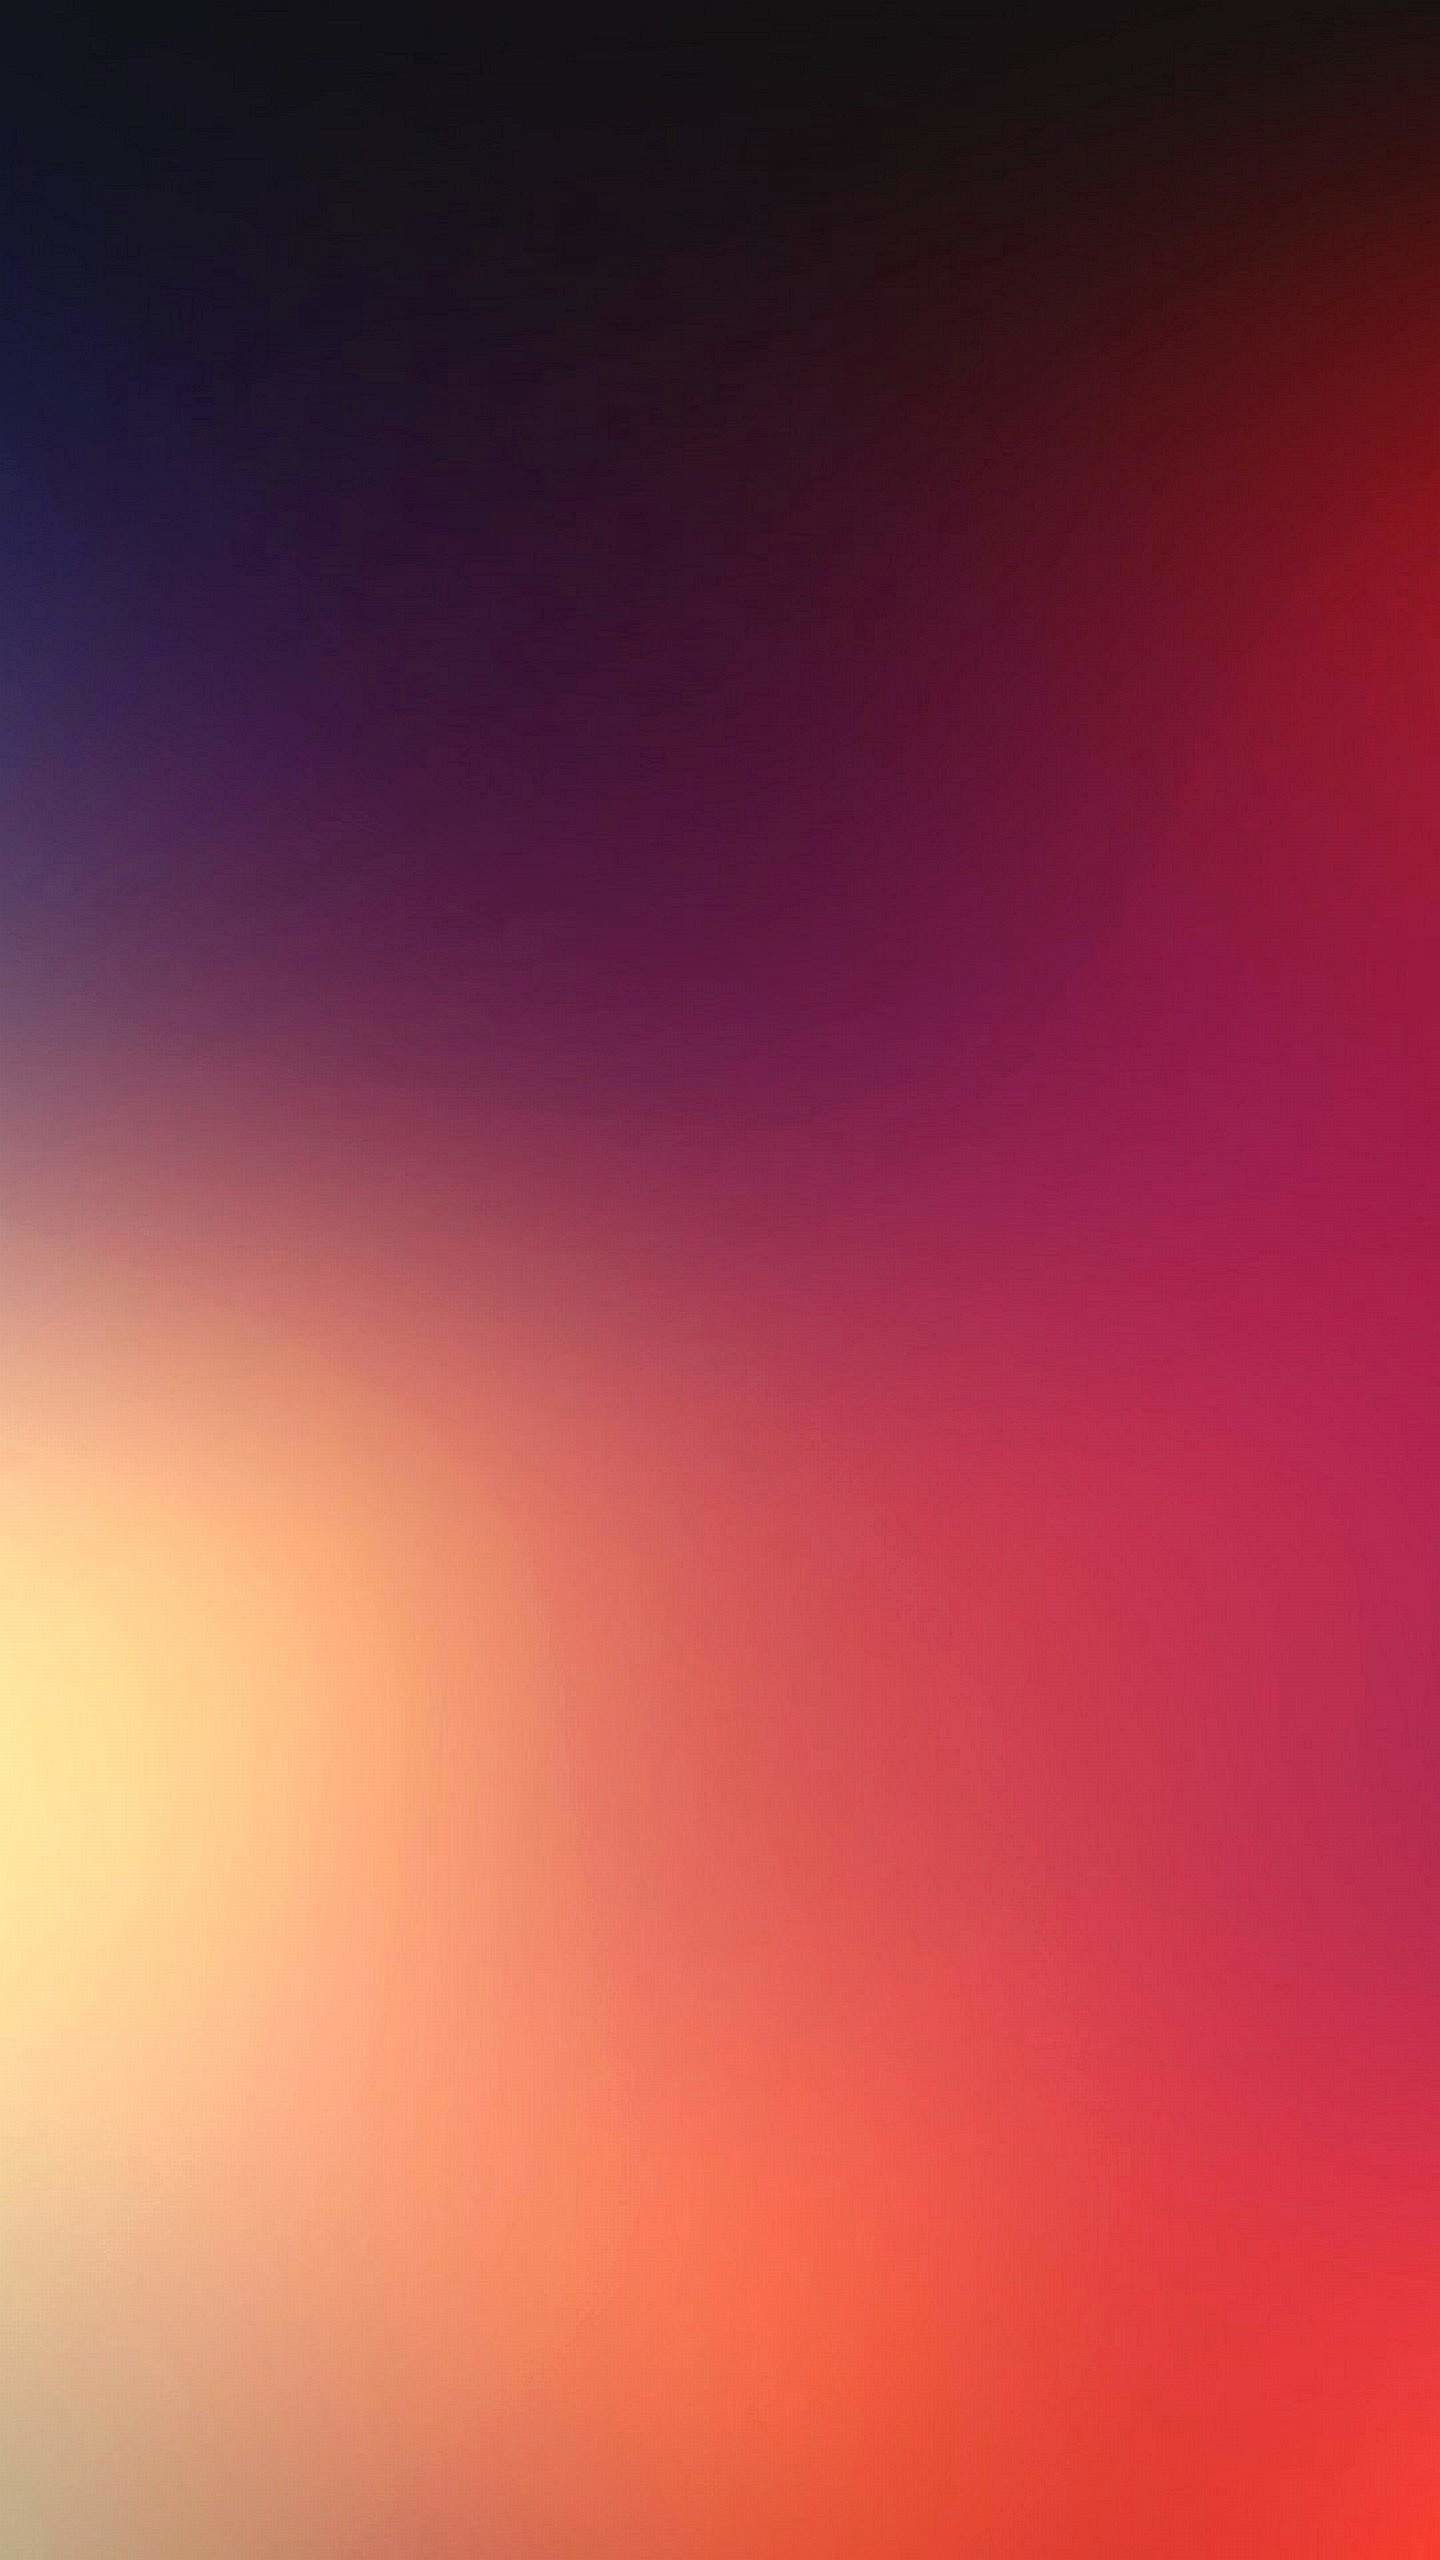 20 Colorful Wallpapers For Your Quad Hd Smartphone 1440x2560